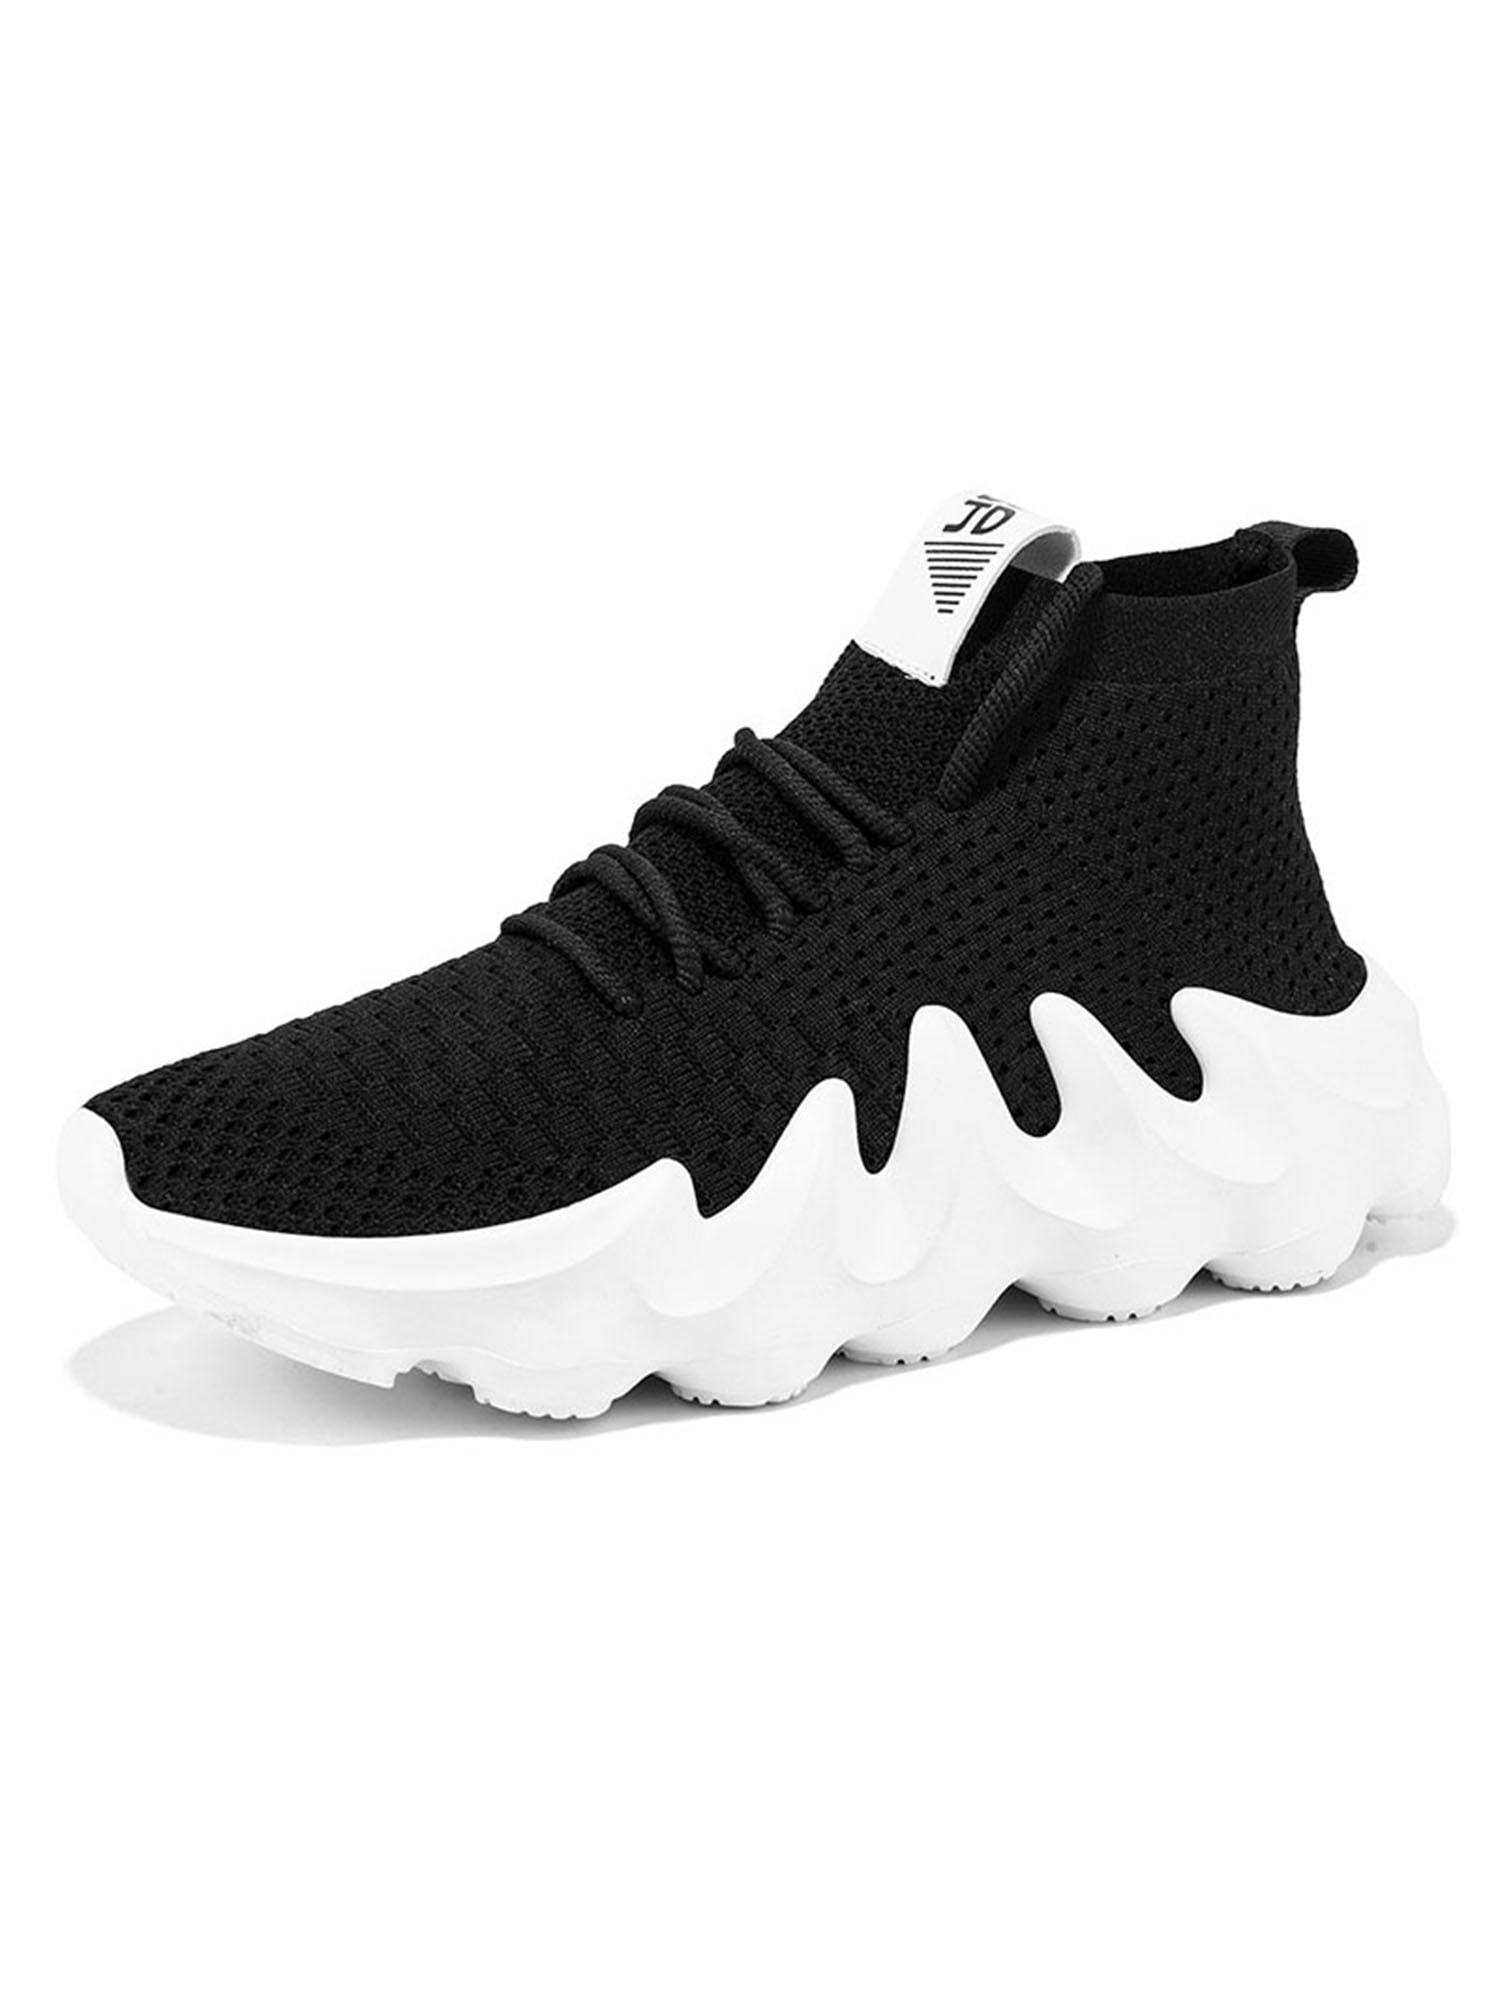 Mens Fashion Sneaker Stylish Running Shoes for Casual Sports Athletic Walking Shoe 